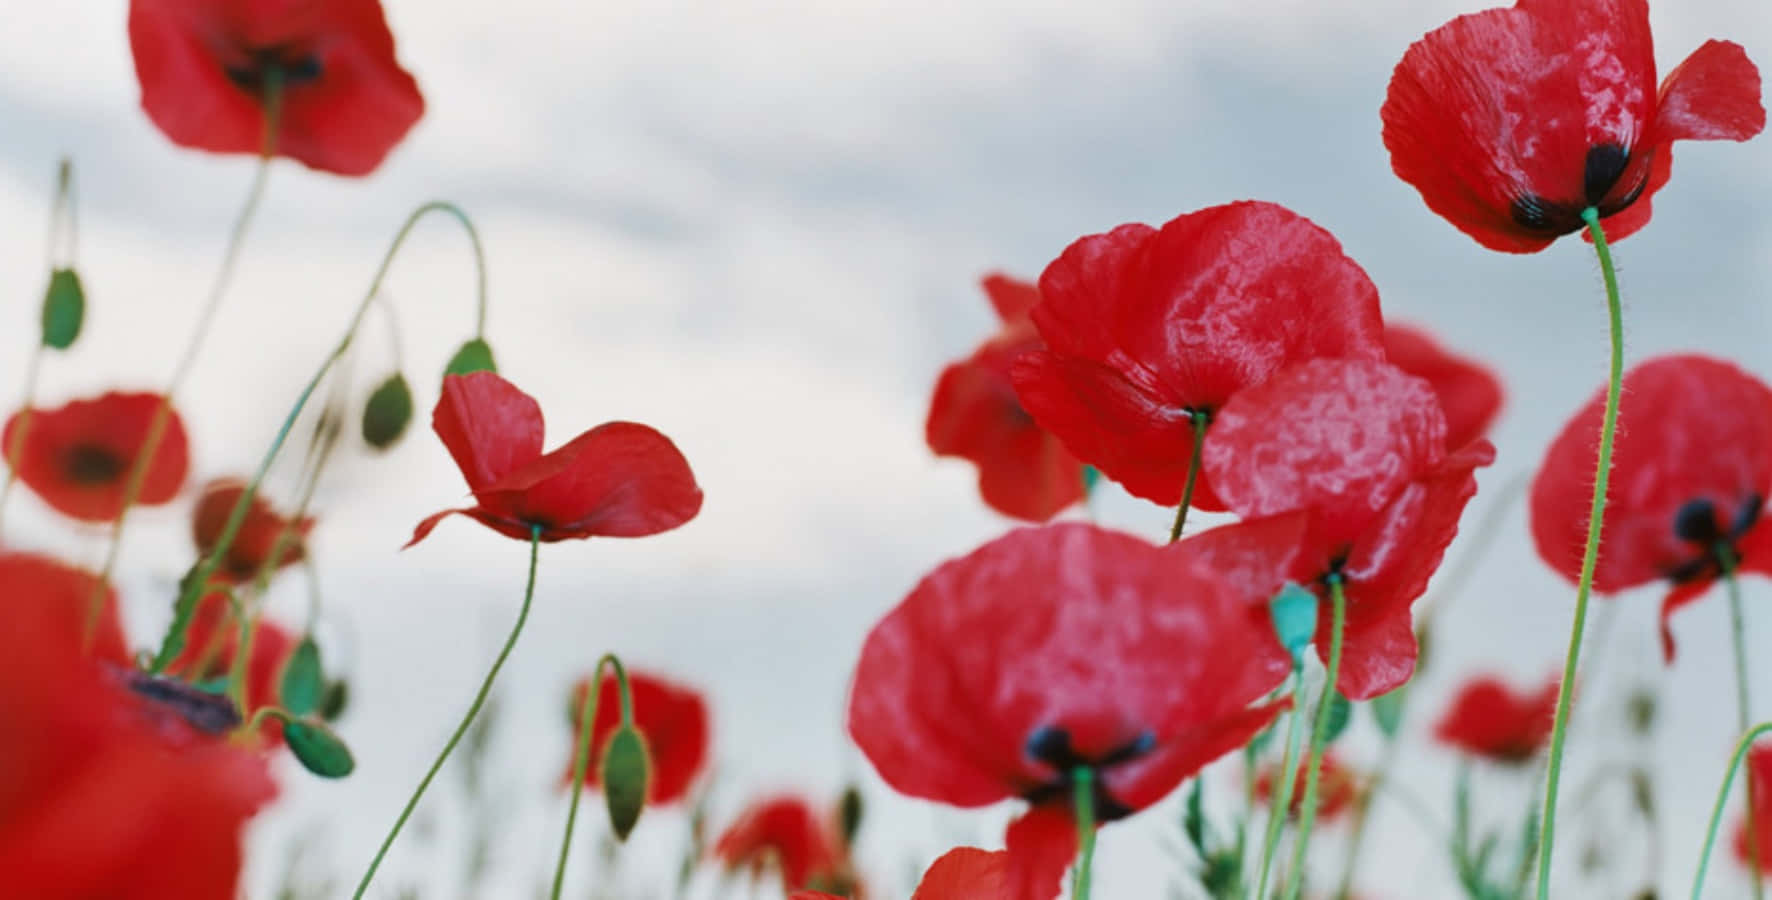 Remembrance Day - A Time to Remember